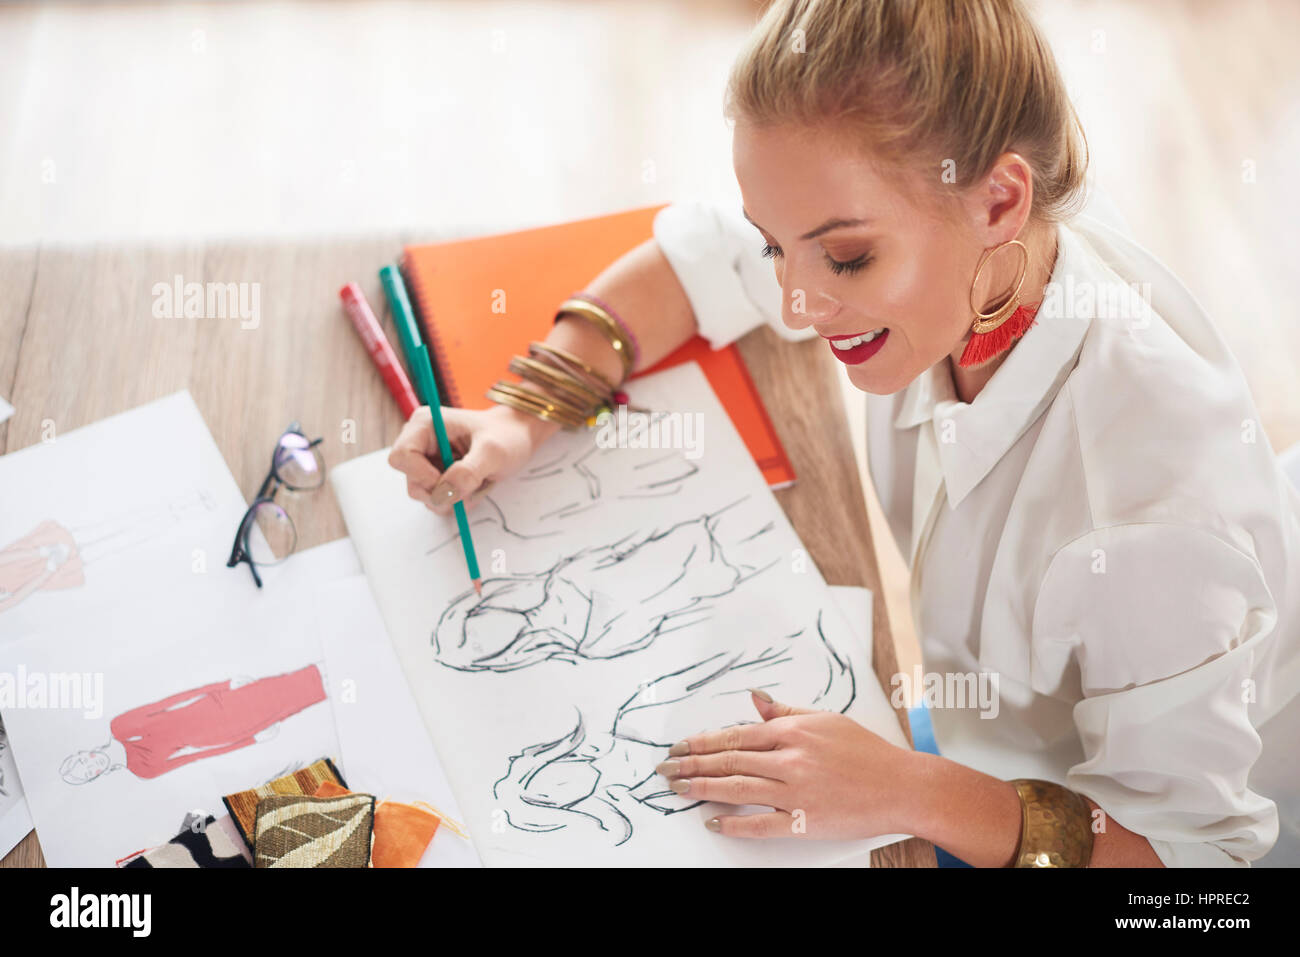 Female design professional sketching at table Stock Photo